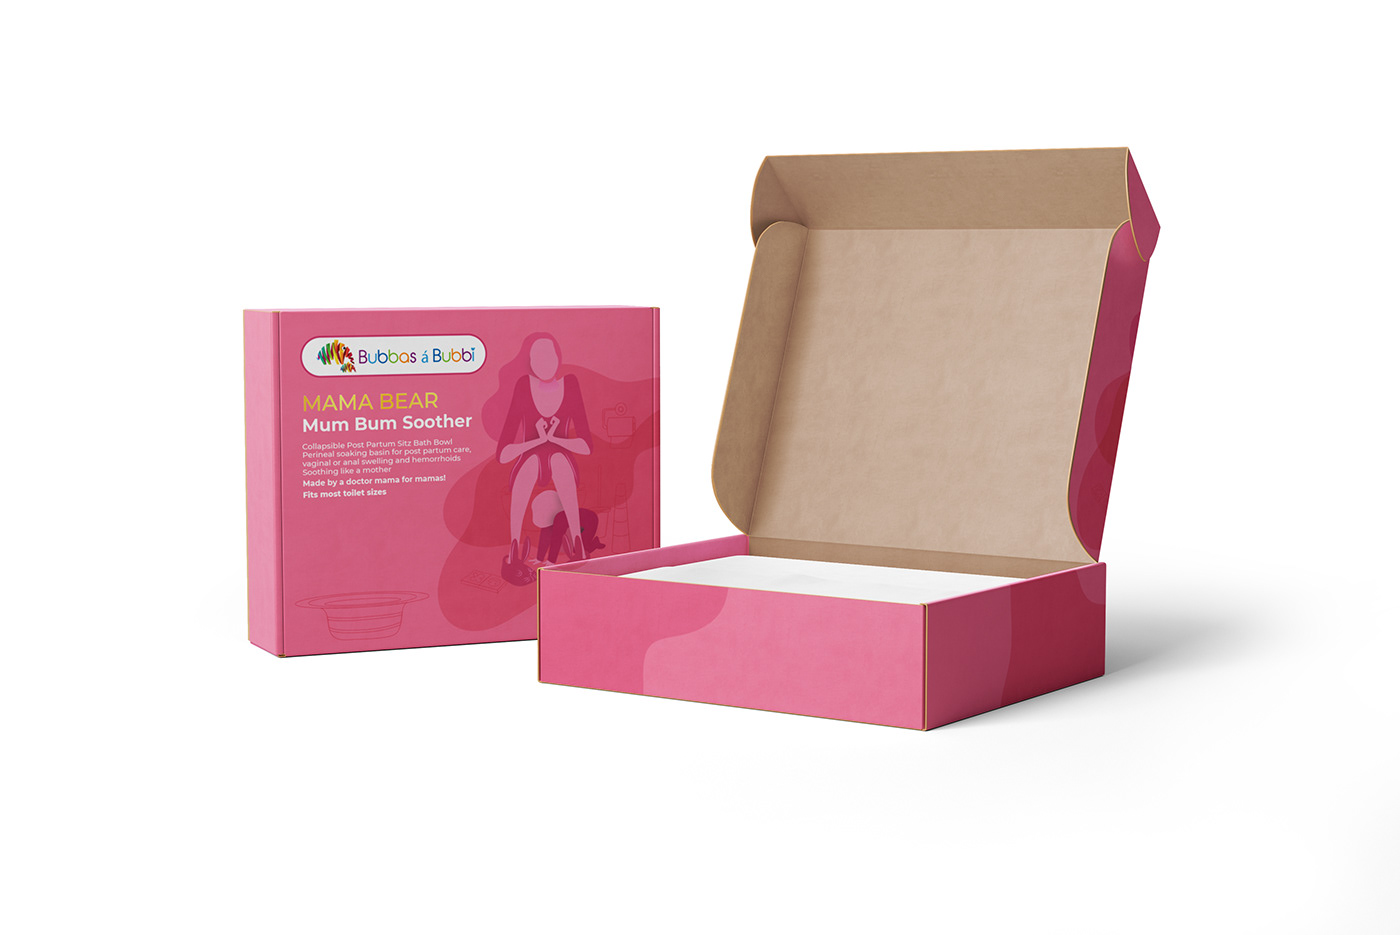 box design box packaging label design product packaging Mockup packaging design Pregancy care